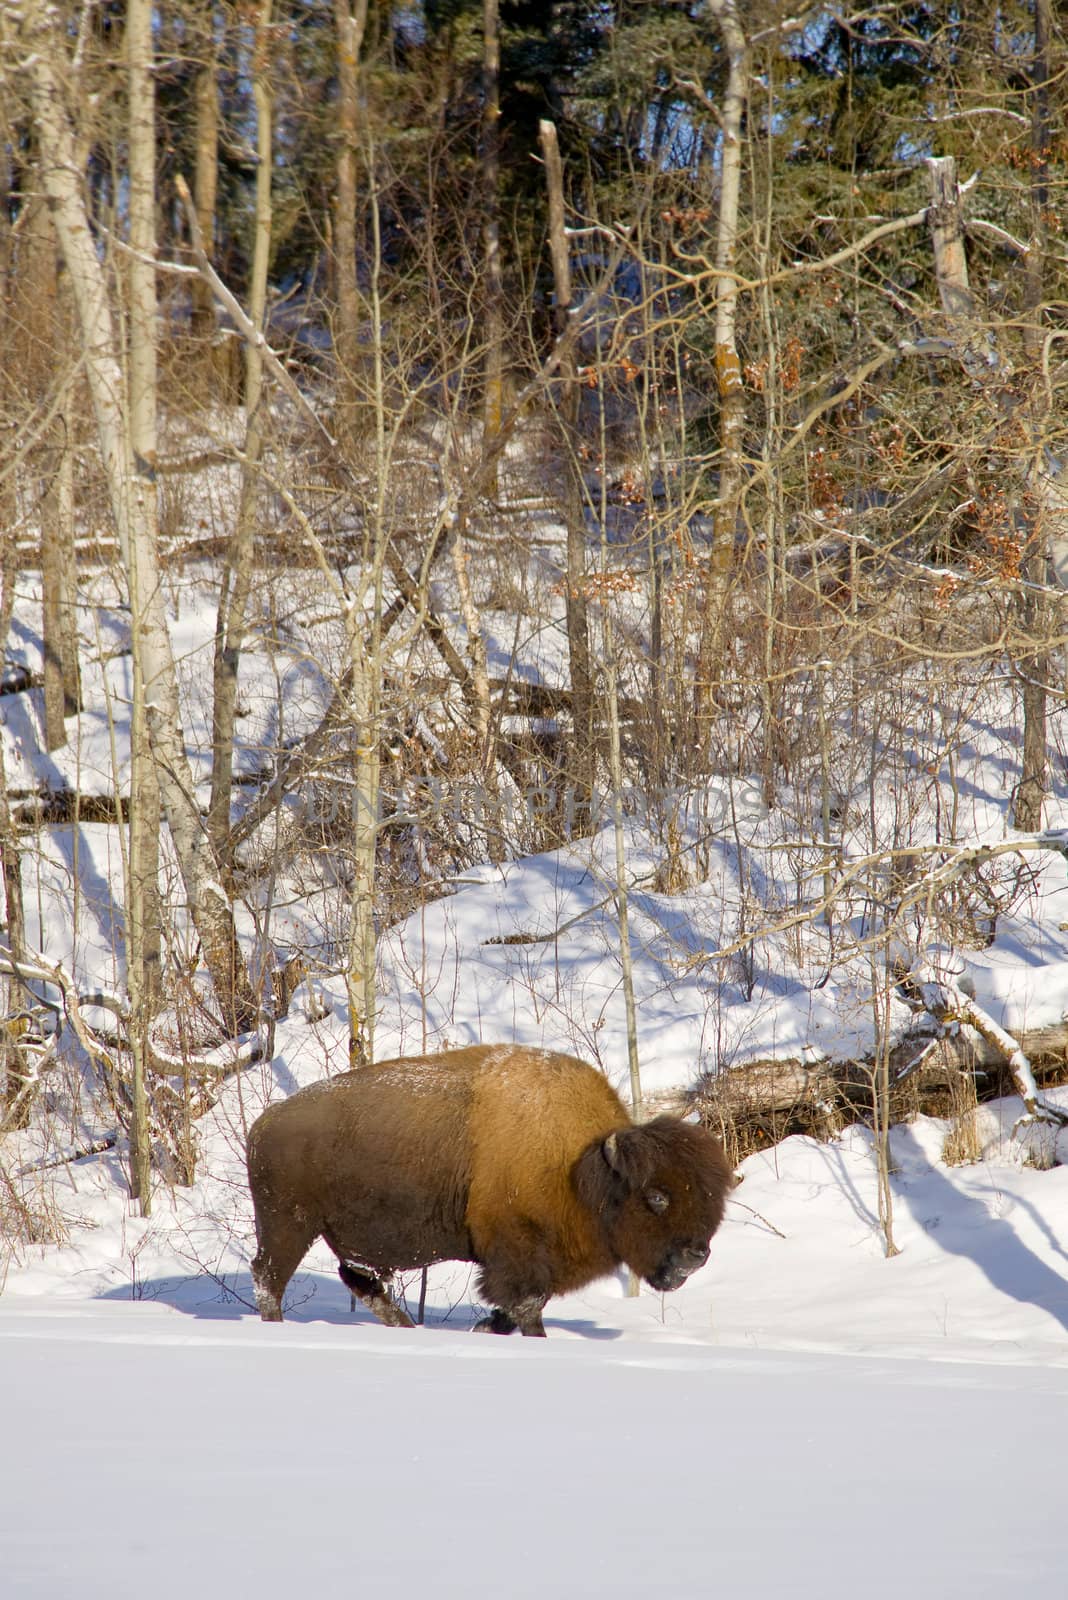 A single Bison in winter snow